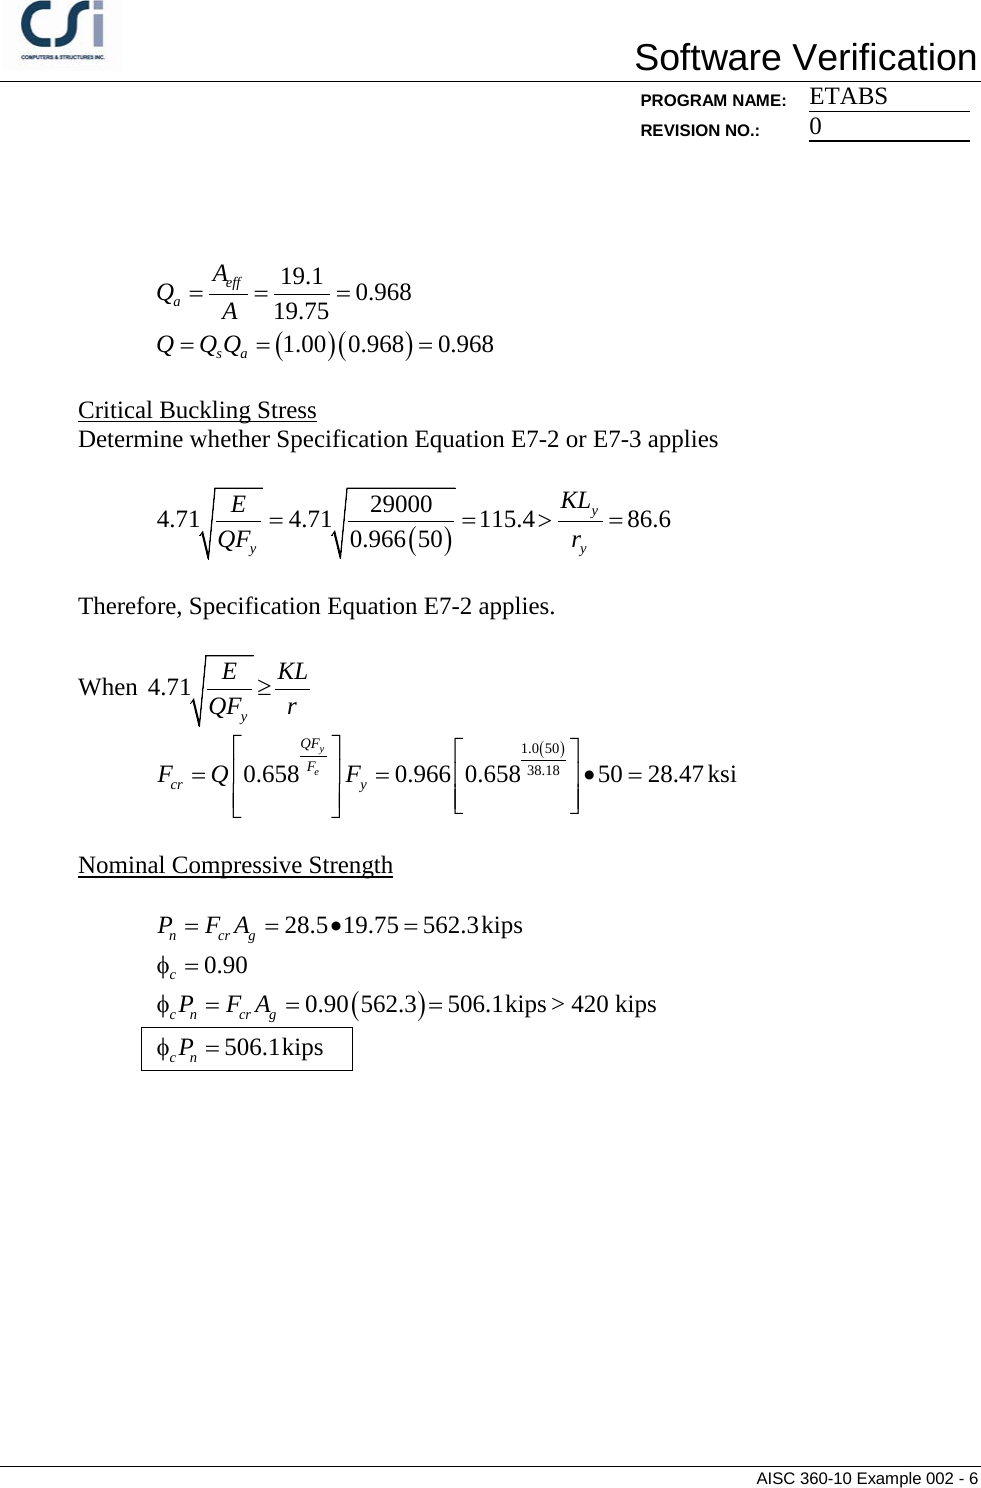 Page 6 of 6 - Contents AISC 360-10 Example 002